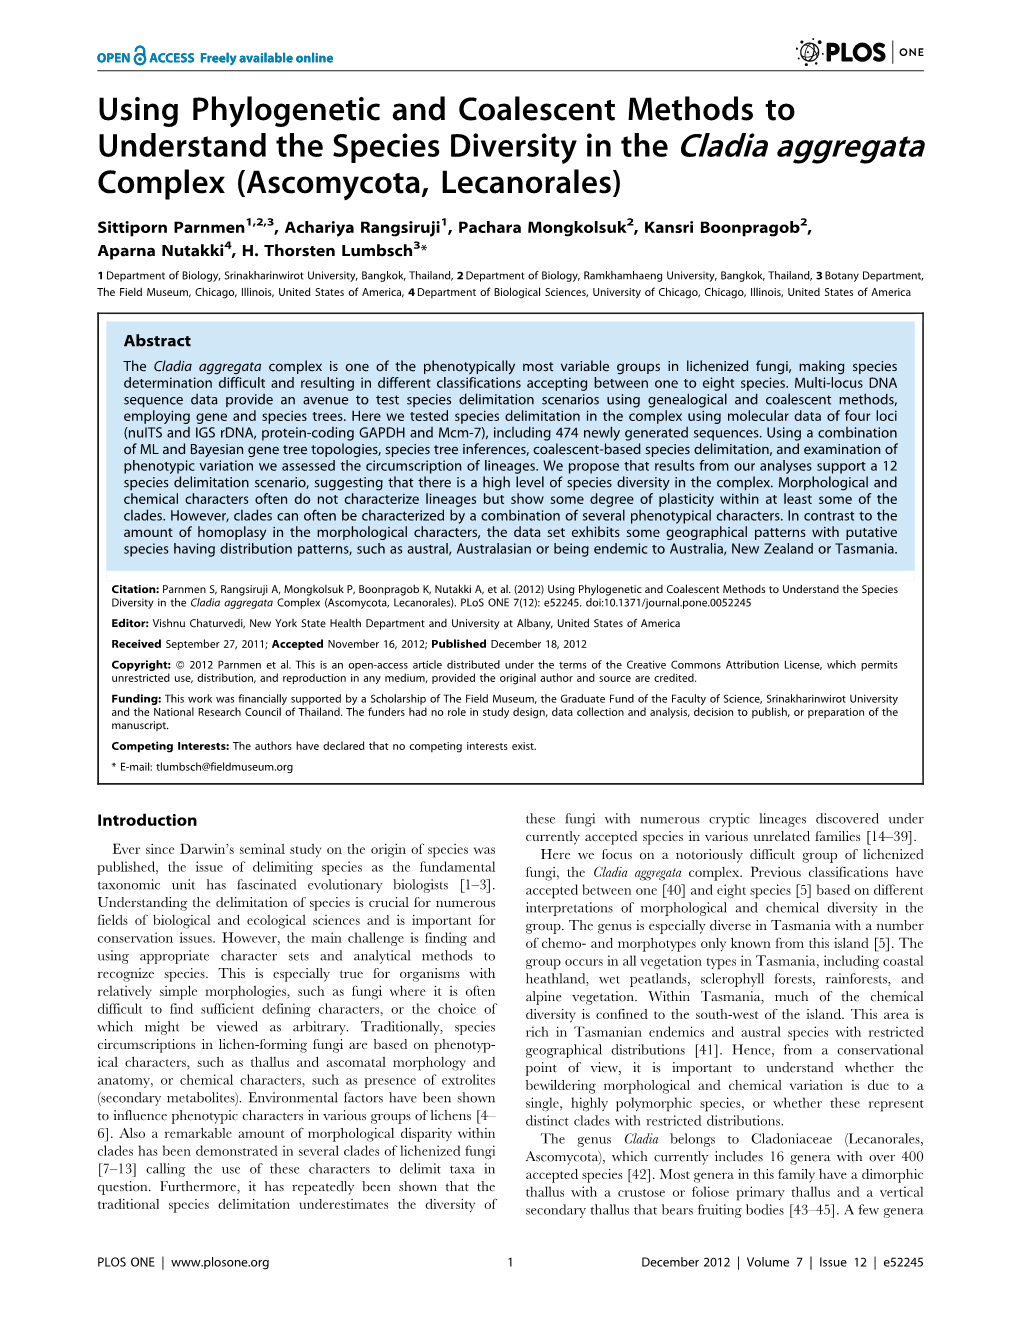 Using Phylogenetic and Coalescent Methods to Understand the Species Diversity in the Cladia Aggregata Complex (Ascomycota, Lecanorales)